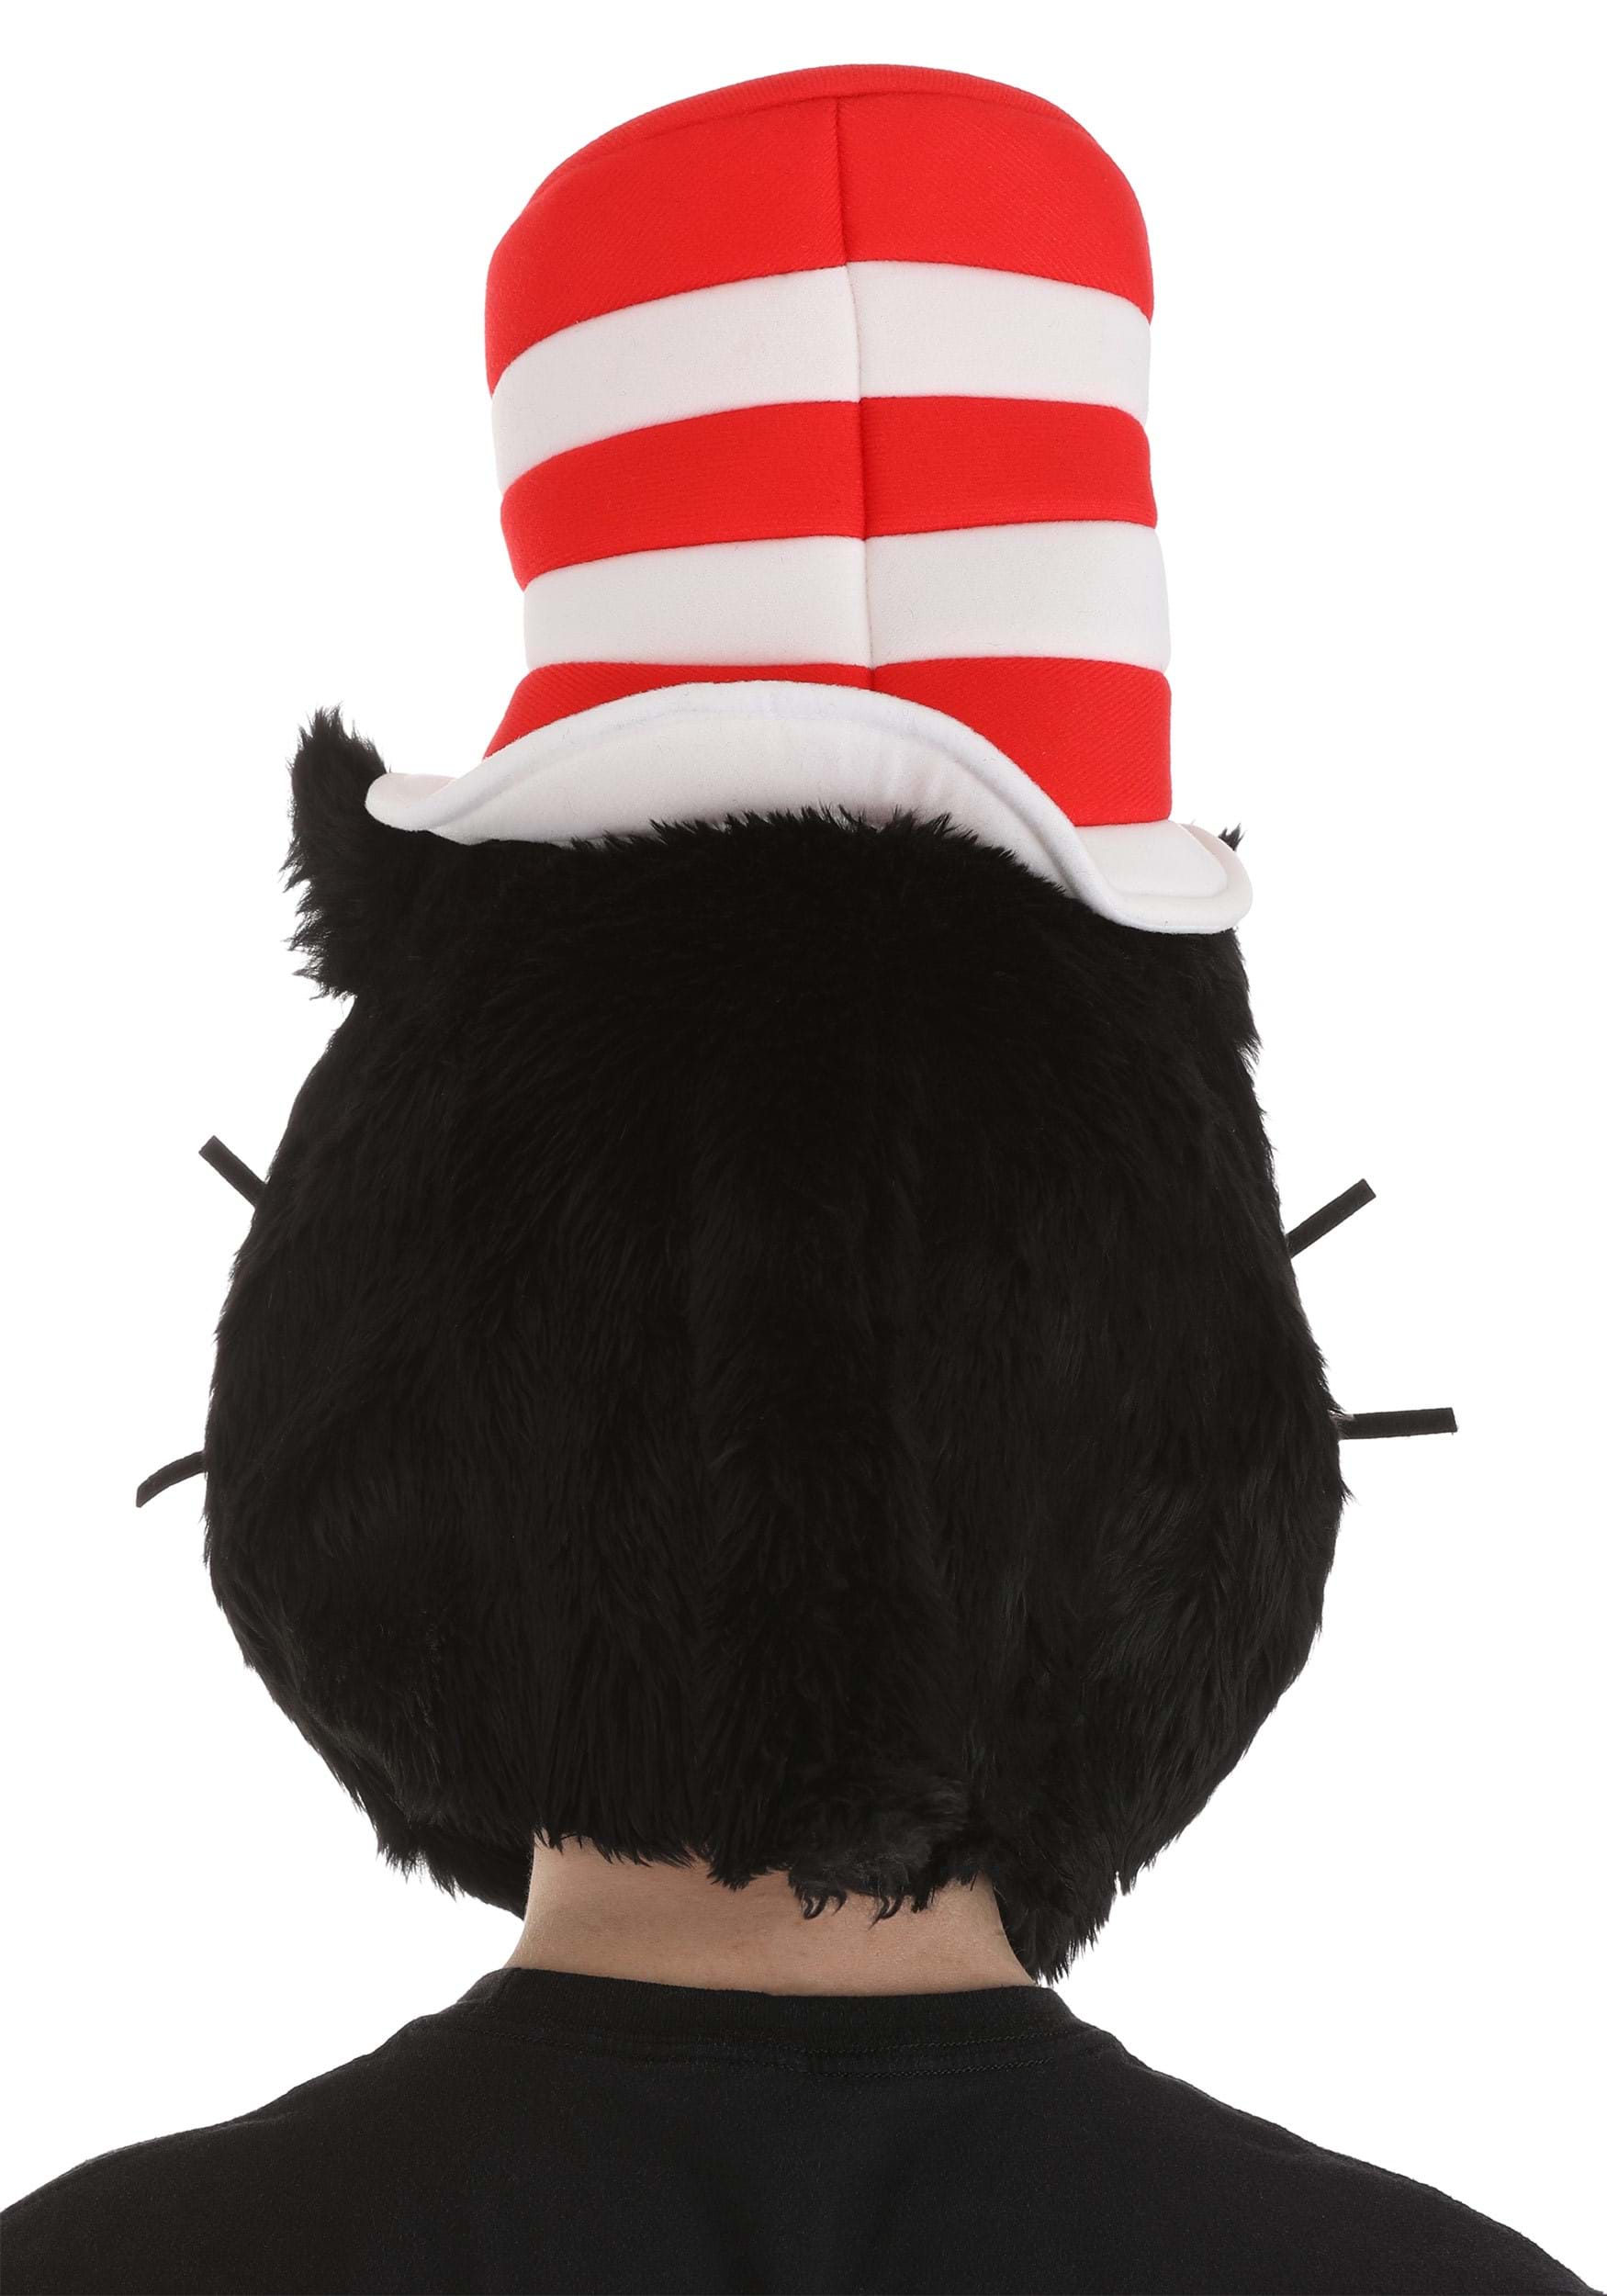 https://images.halloweencostumes.ca/products/80804/2-1-227622/the-cat-in-the-hat-mouth-mover-mask-alt-4.jpg